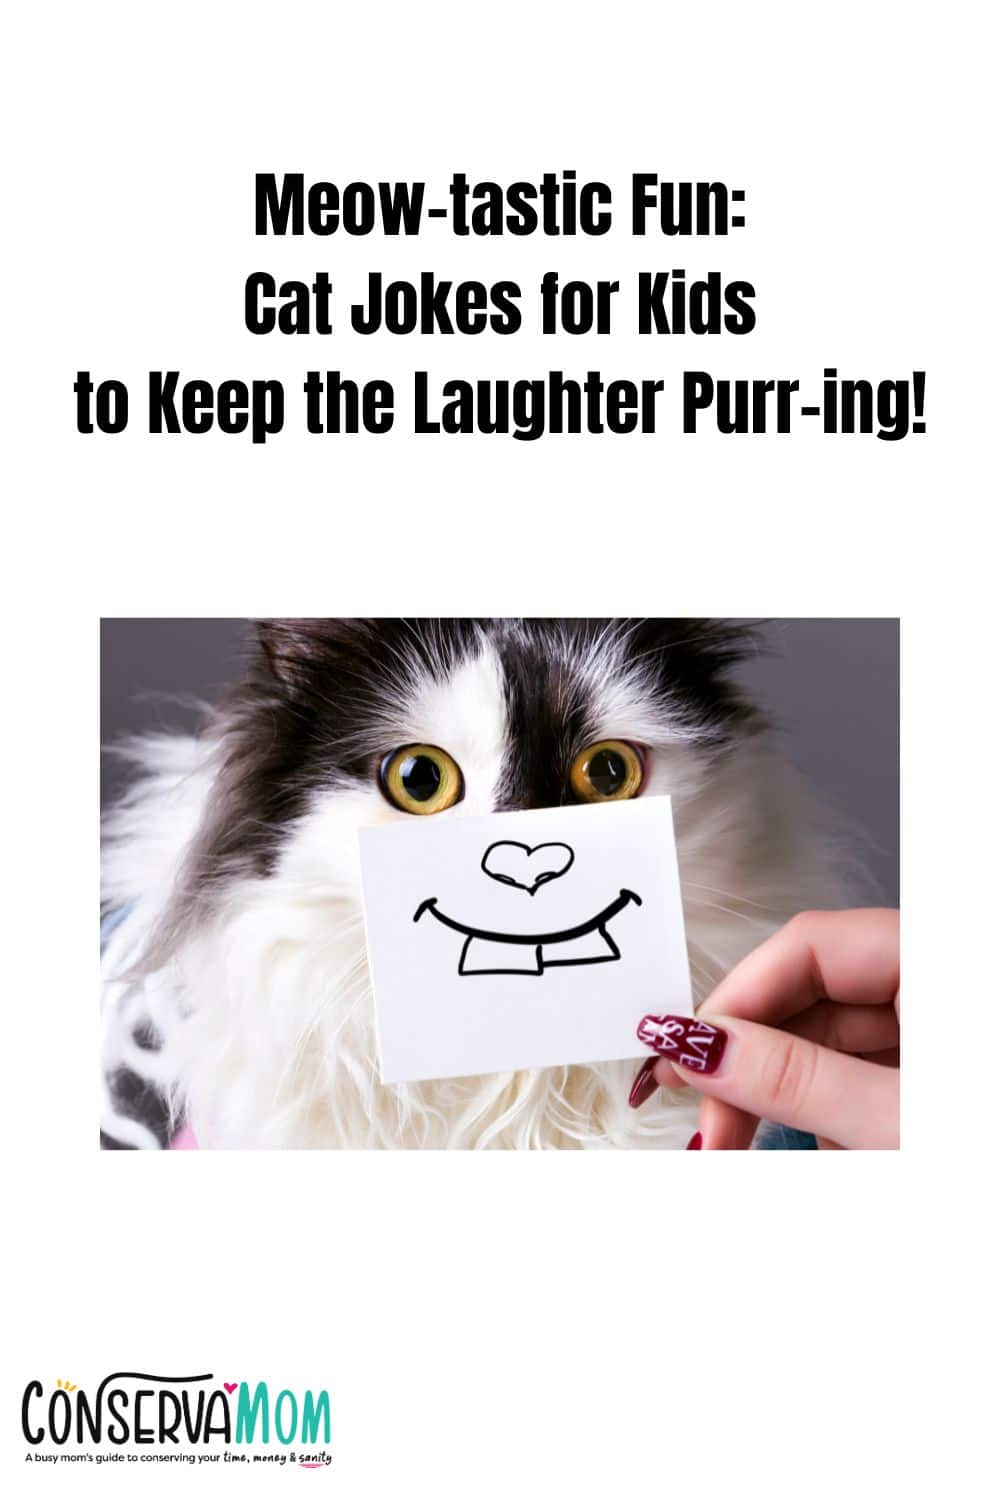 Meow-tastic Fun Cat Jokes for Kids to Keep the Laughter Purr-ing!